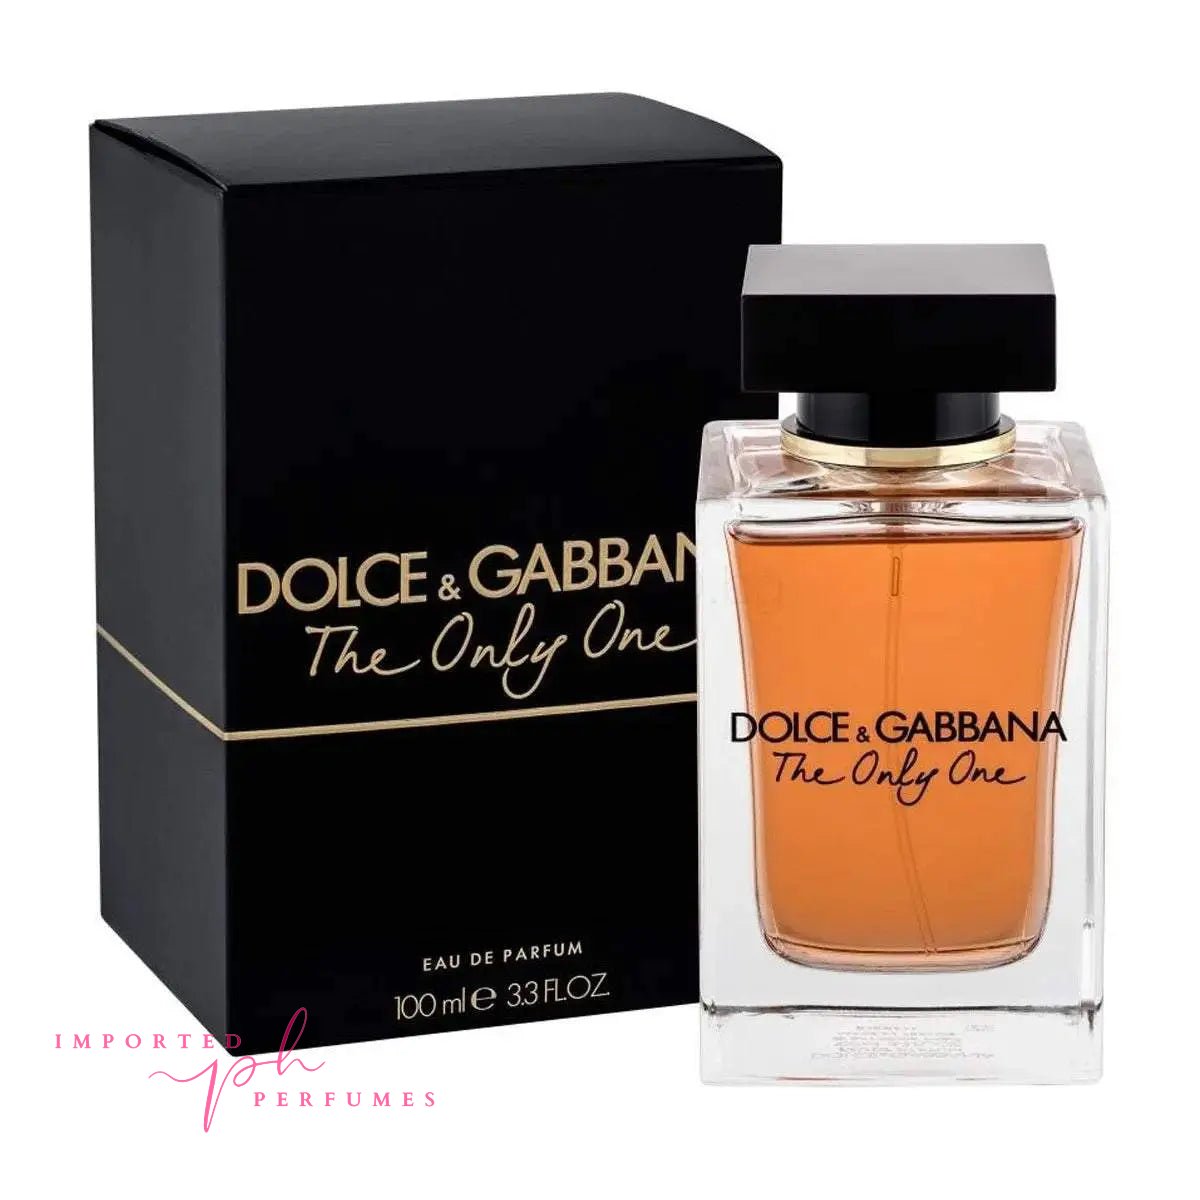 [TESTER] Dolce & Gabbana The Only One Eau De Parfum Women 100ml Imported Perfumes Co